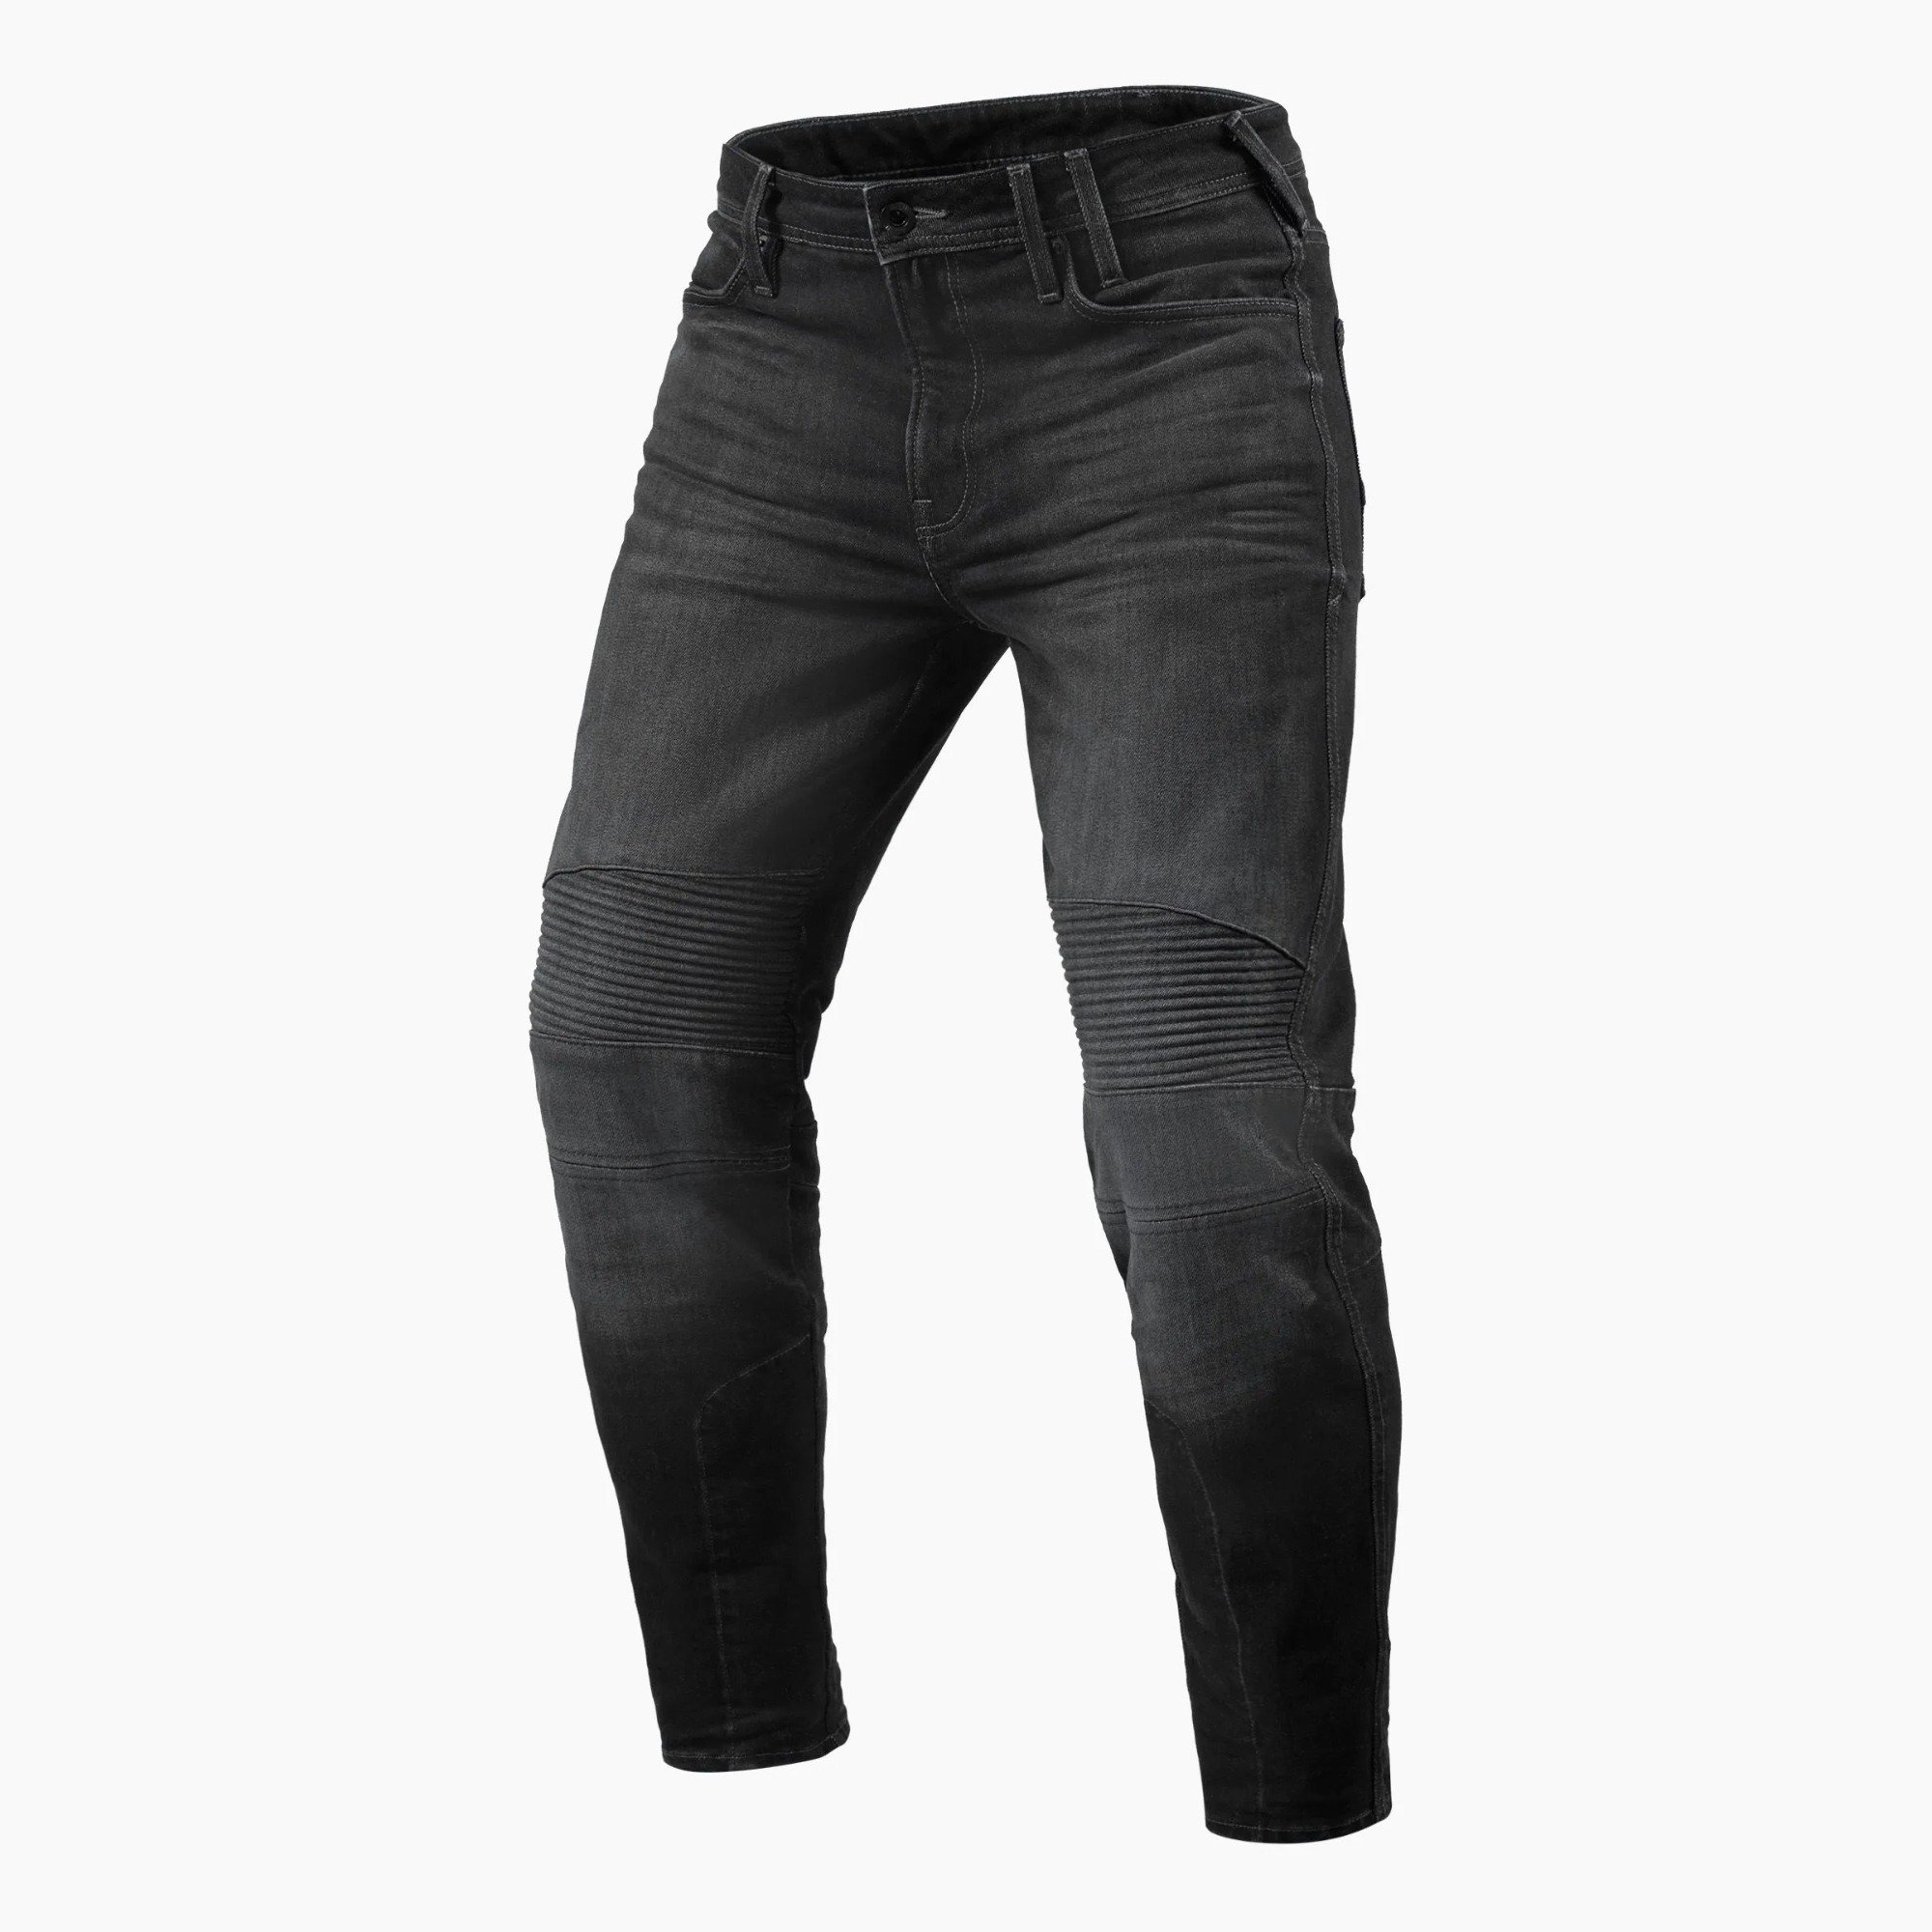 Image of REV'IT! Jeans Moto 2 TF Dark Grey Used Motorcycle Jeans Size L36/W31 ID 8700001337885